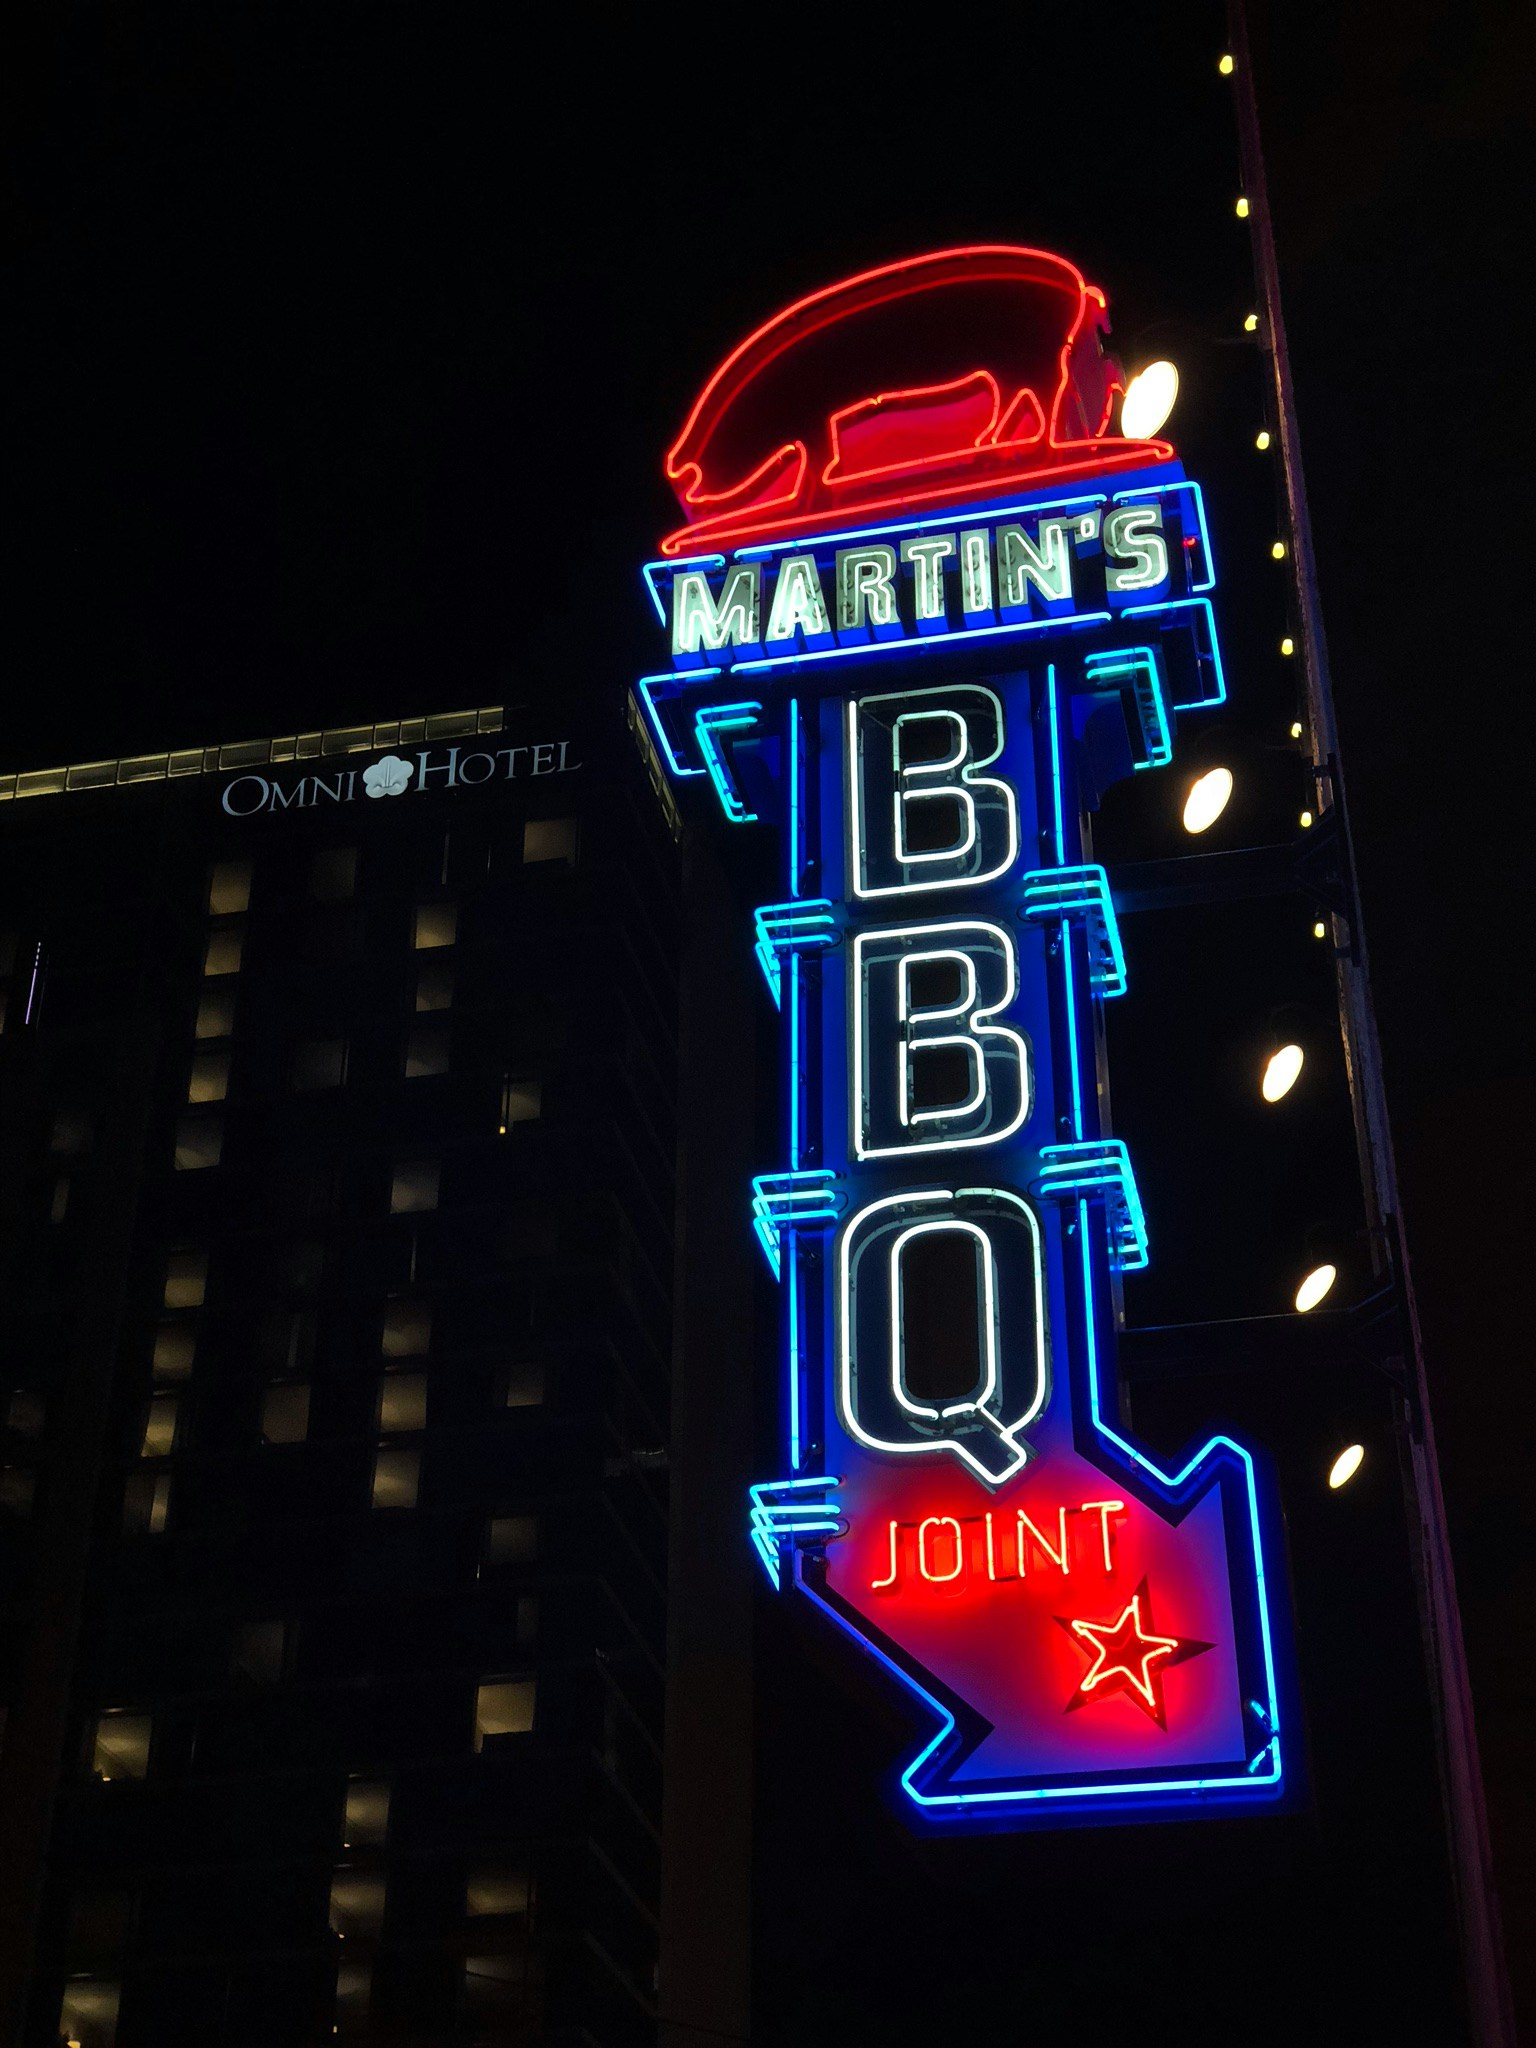 a building in the city at night lit up with lights and sign